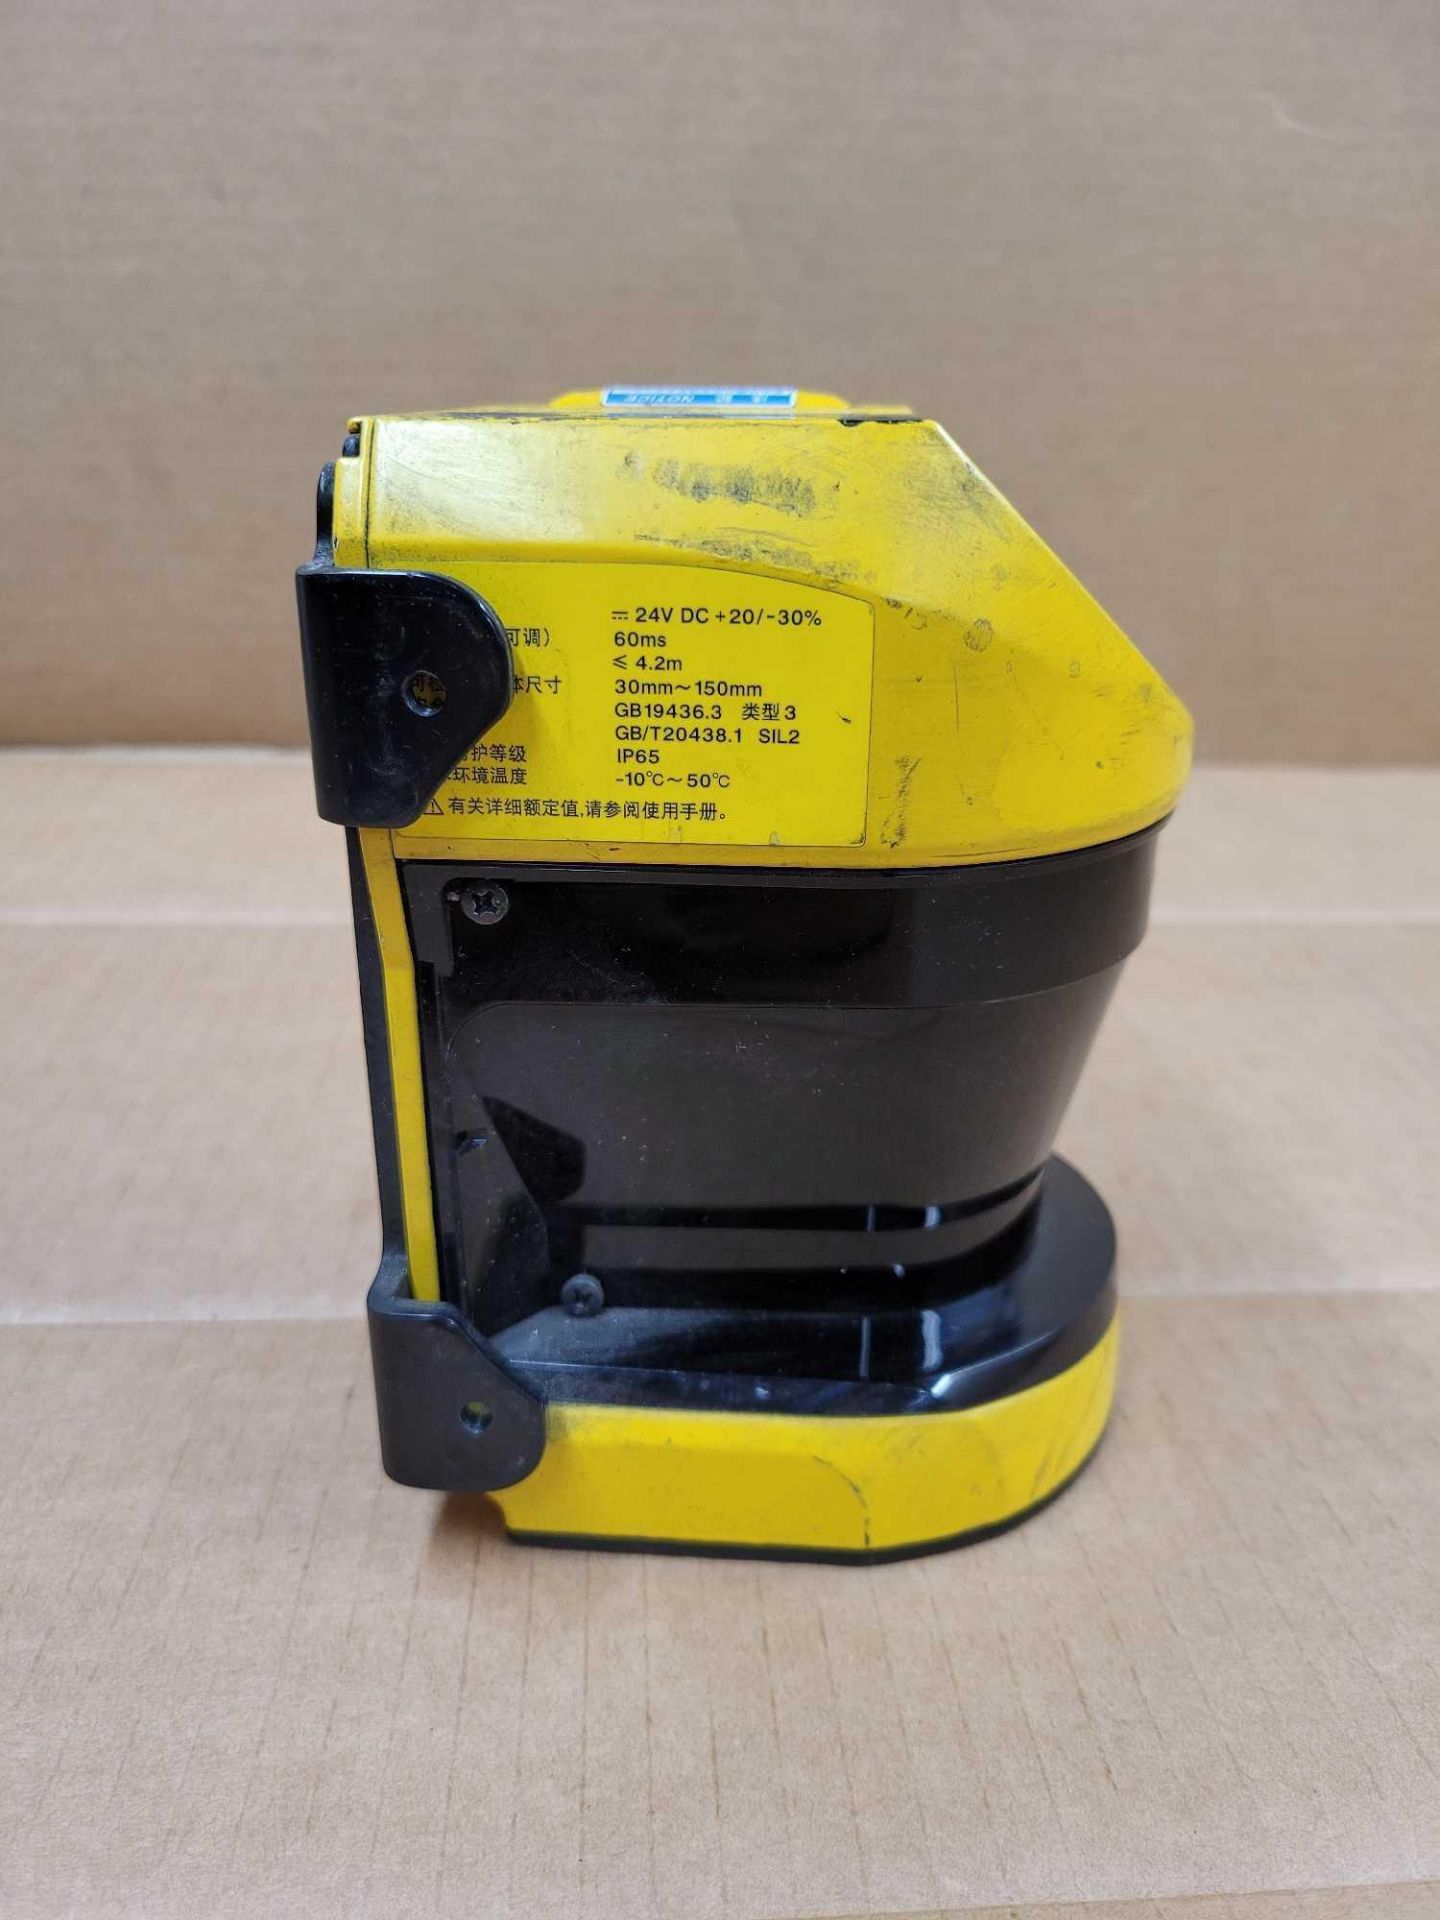 KEYENCE SZ-16V / Safety Laser Scanner  /  Lot Weight: 4.0 lbs - Image 3 of 8